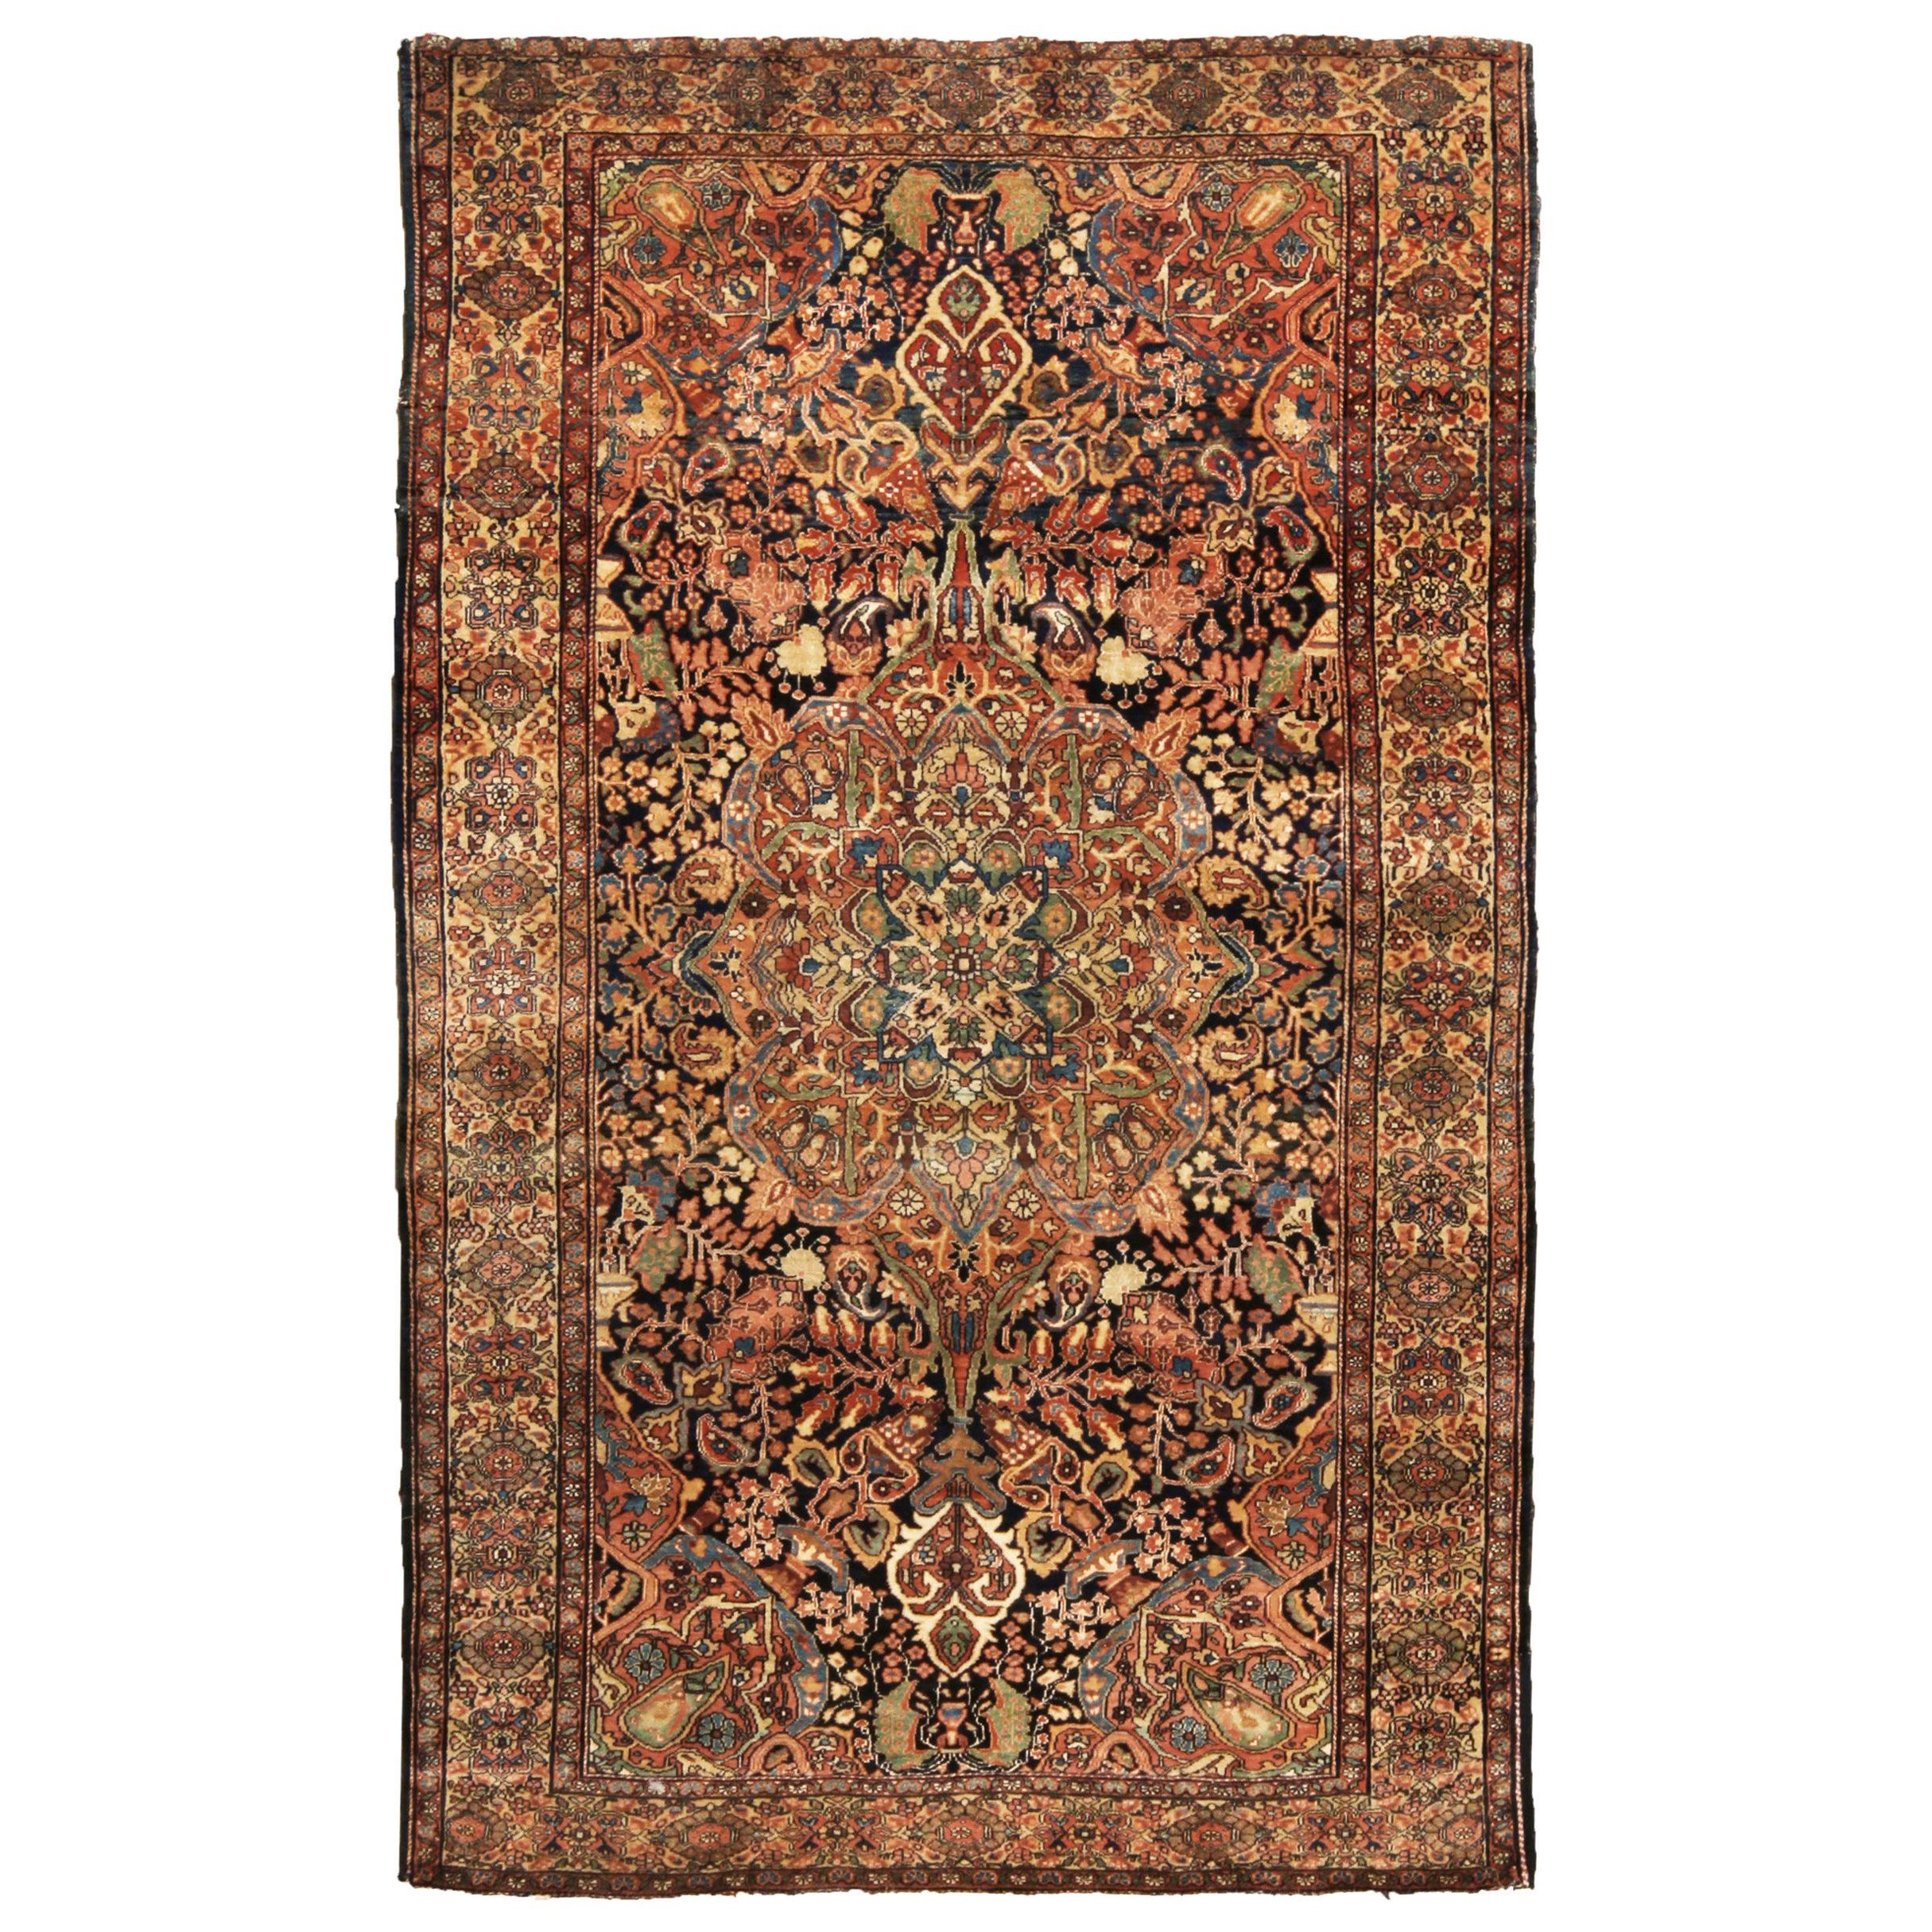 Antique Sarouk Traditional Golden Brown Wool Persian Rug by Rug & Kilim For Sale